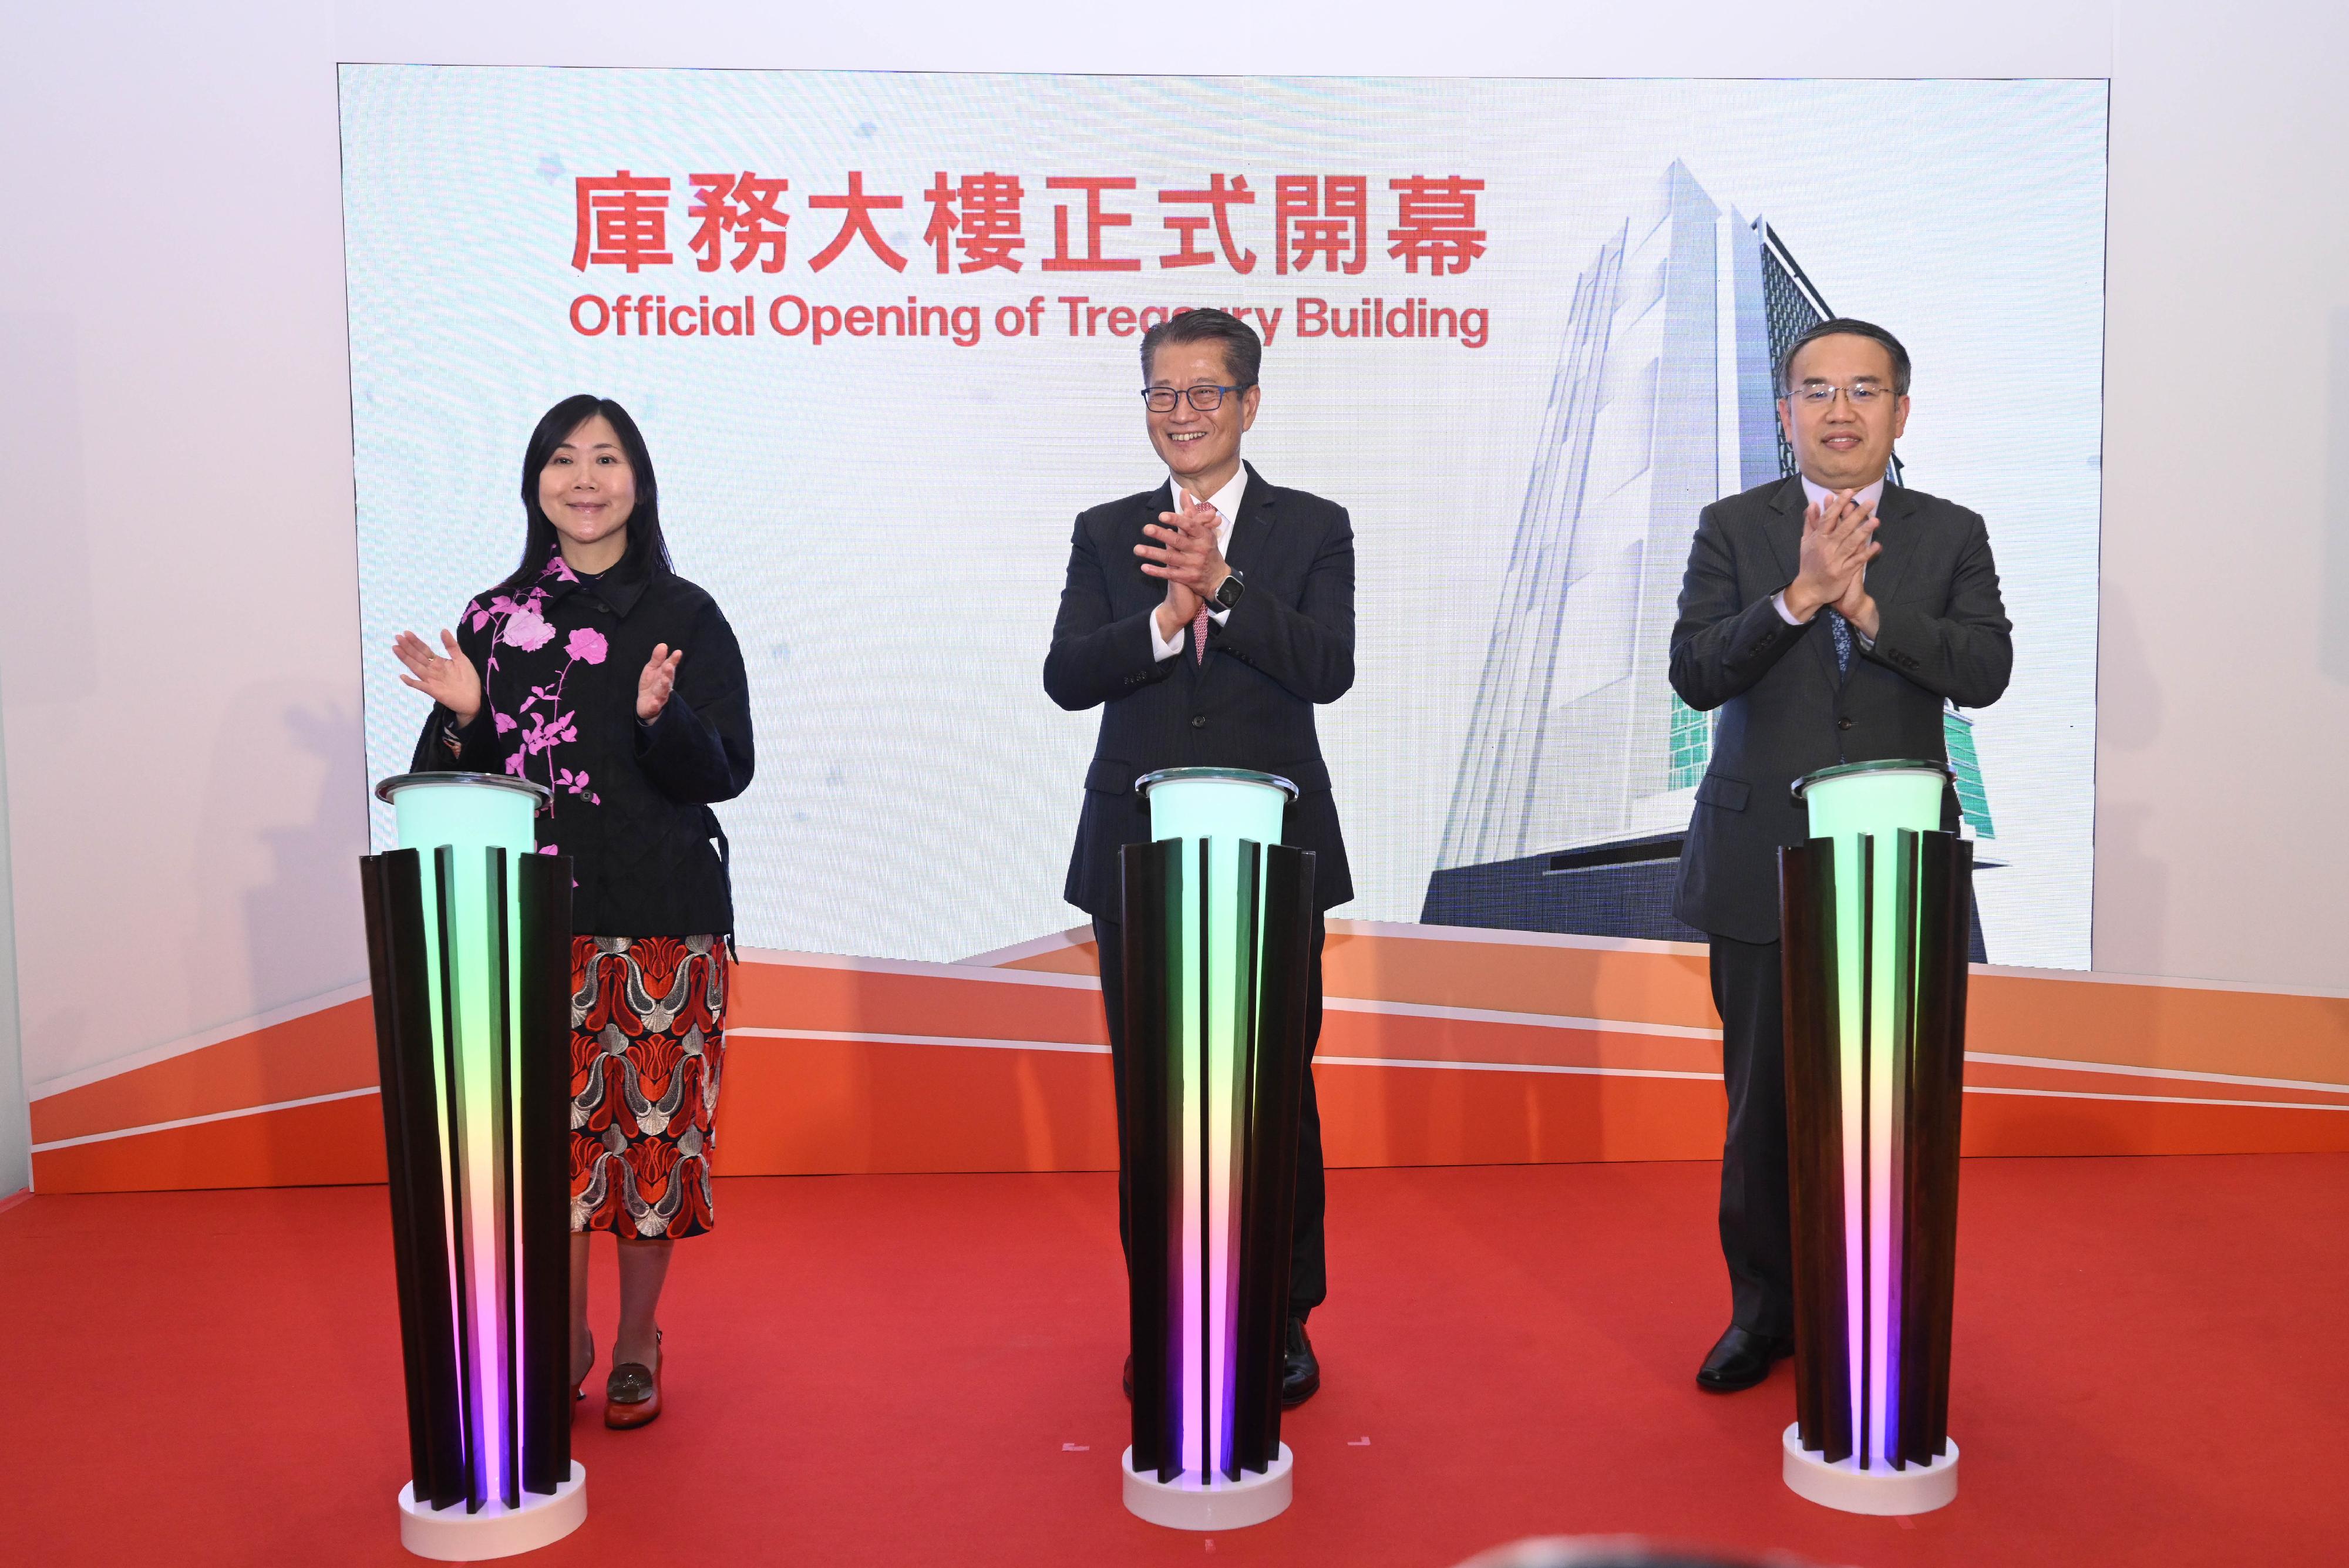 The opening ceremony of the Treasury Building was held today (March 12). Photo shows the Financial Secretary, Mr Paul Chan (centre); the Secretary for Financial Services and the Treasury, Mr Christopher Hui (right); and the Permanent Secretary for Financial Services and the Treasury (Treasury), Miss Cathy Chu (left), officiating at the opening ceremony.

